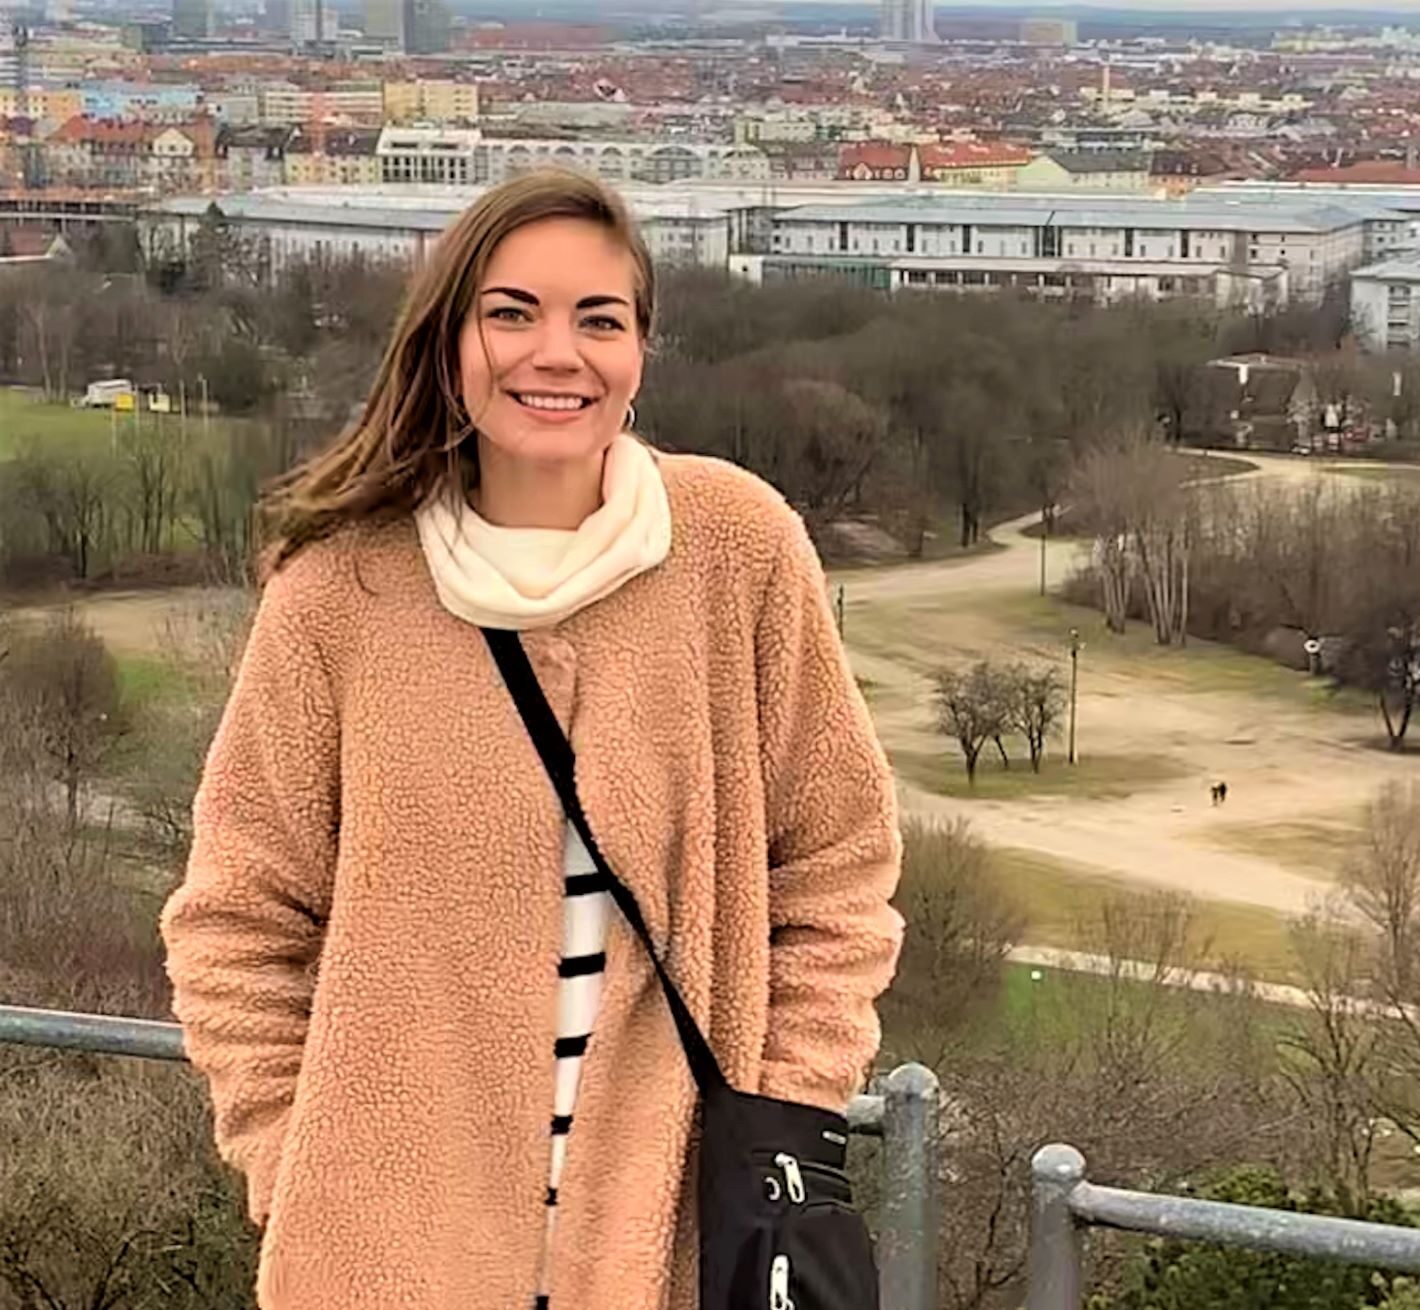 MSW graduate student studies human rights issues in Germany